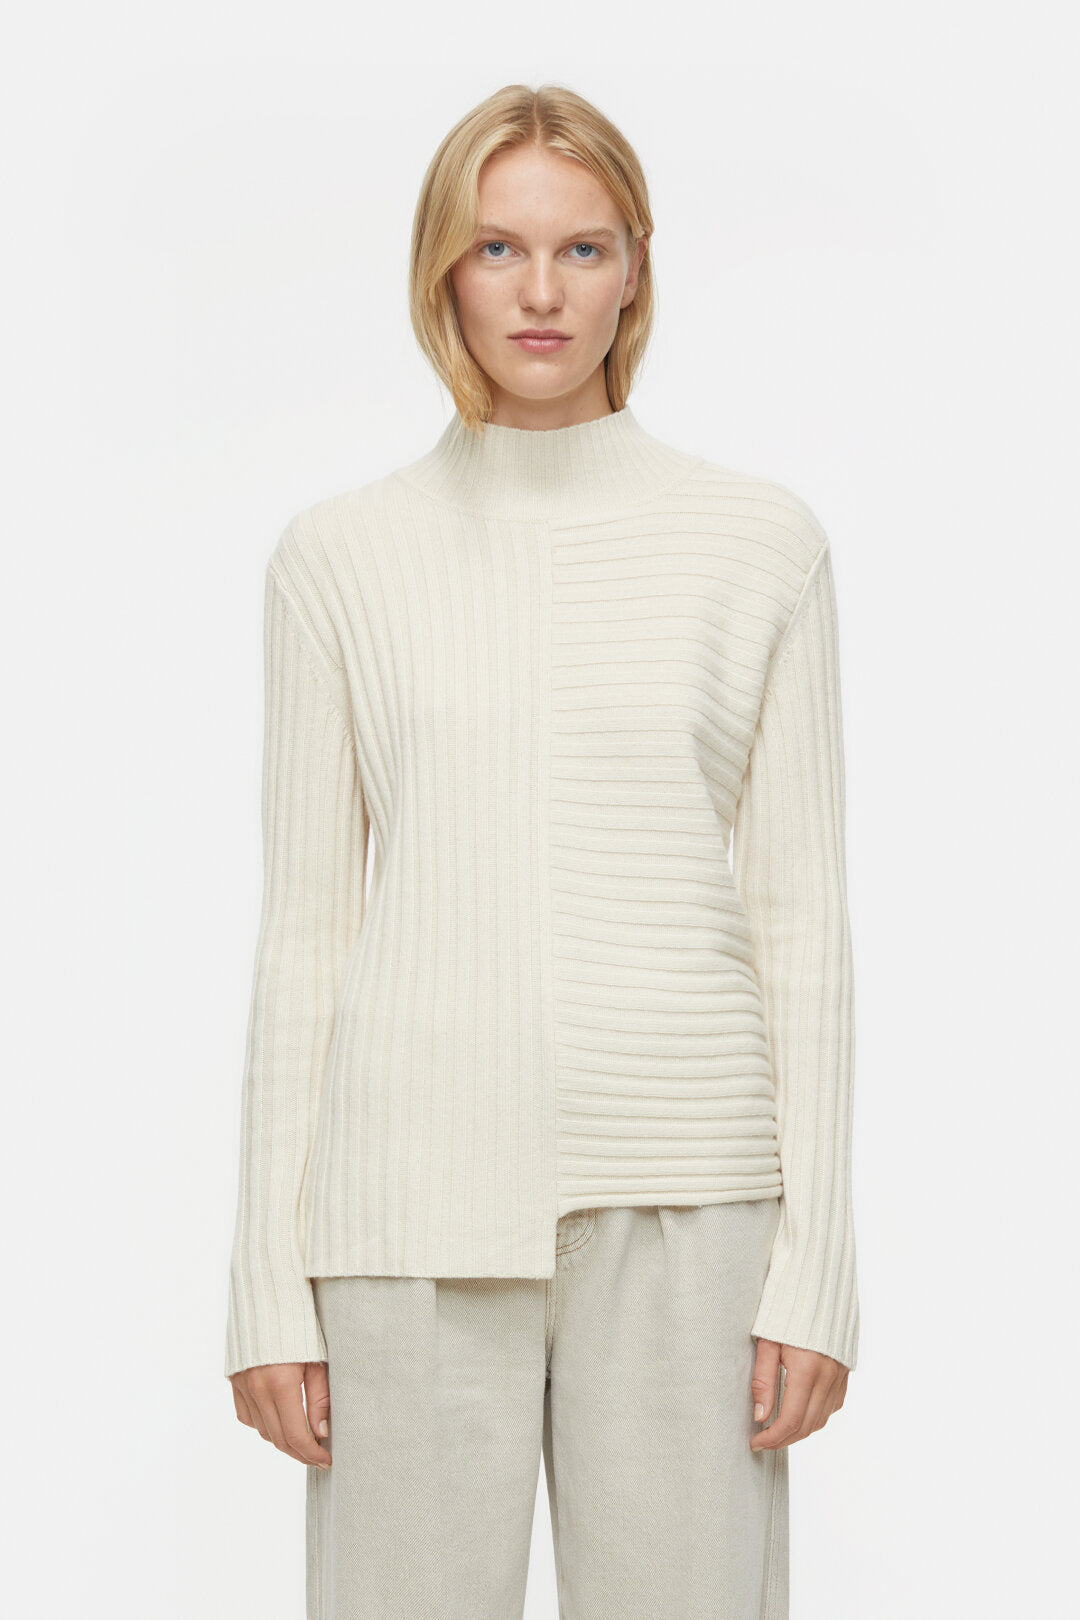 CLOSED WOMENS CASHMERE-MIX PULLOVER - 2 COLORS